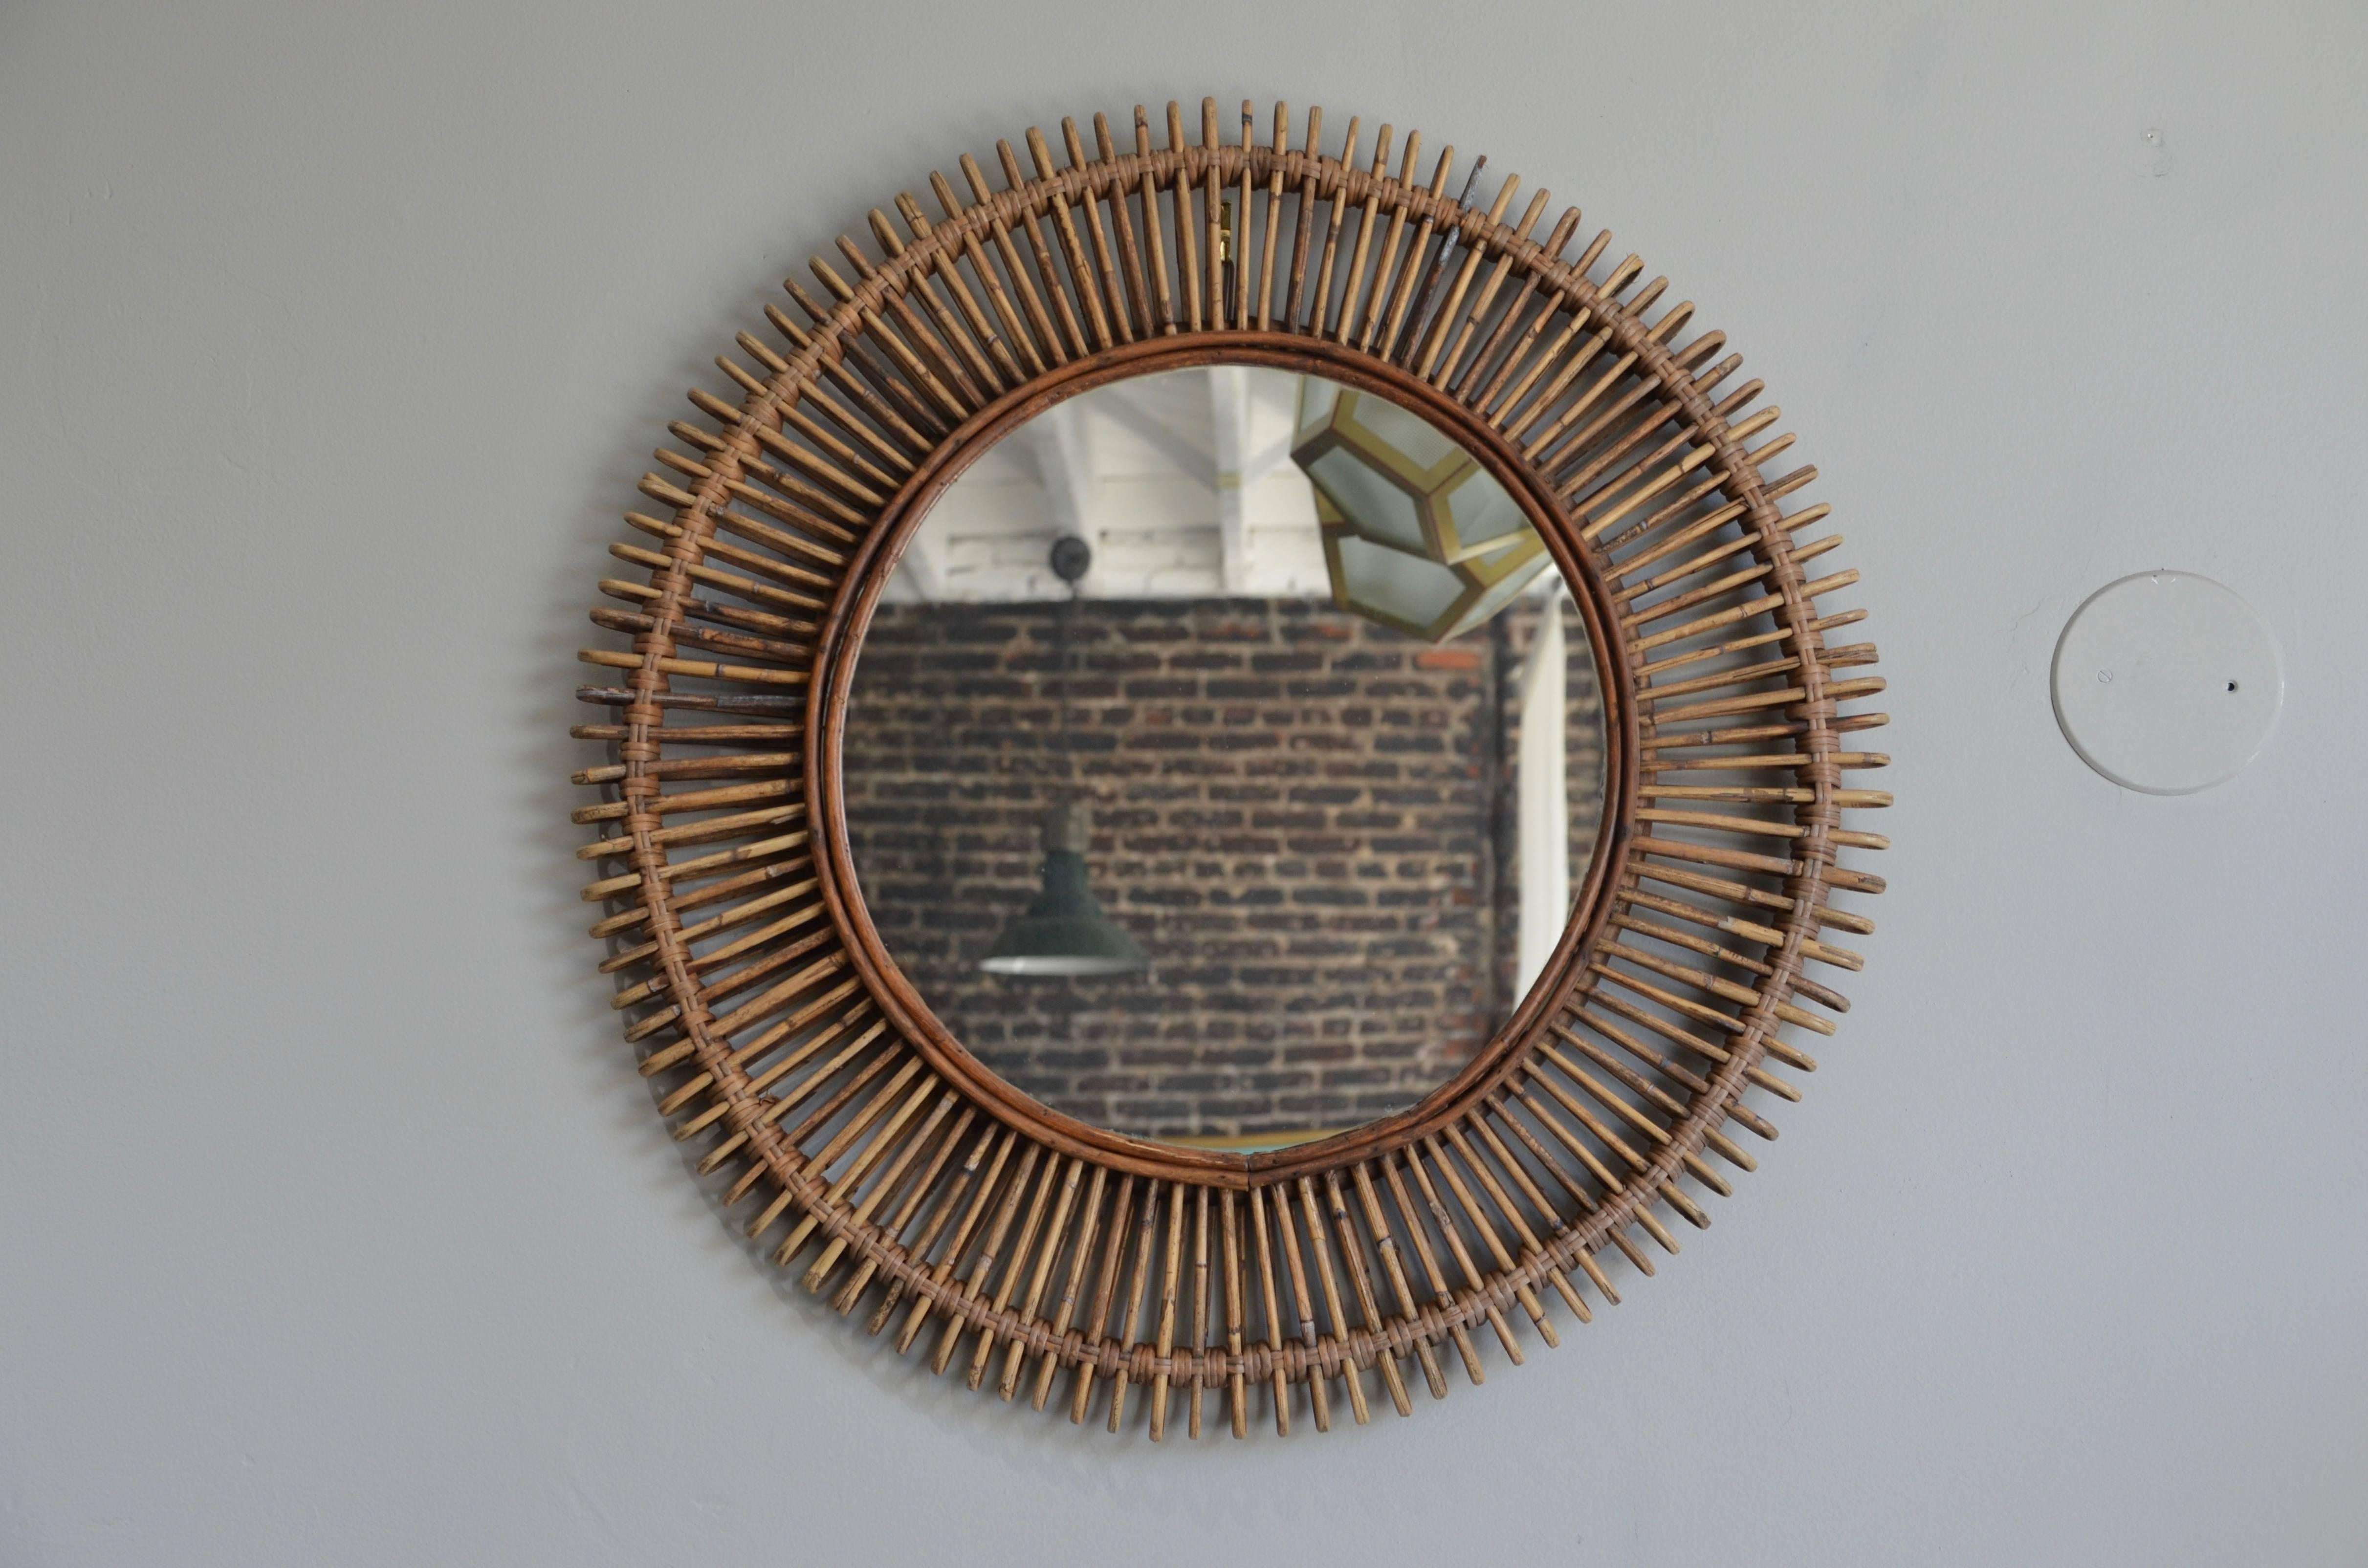 Single 'Oculus' round rattan mirror by Design Frères.

Diameter of the inner mirror panel is 17.5